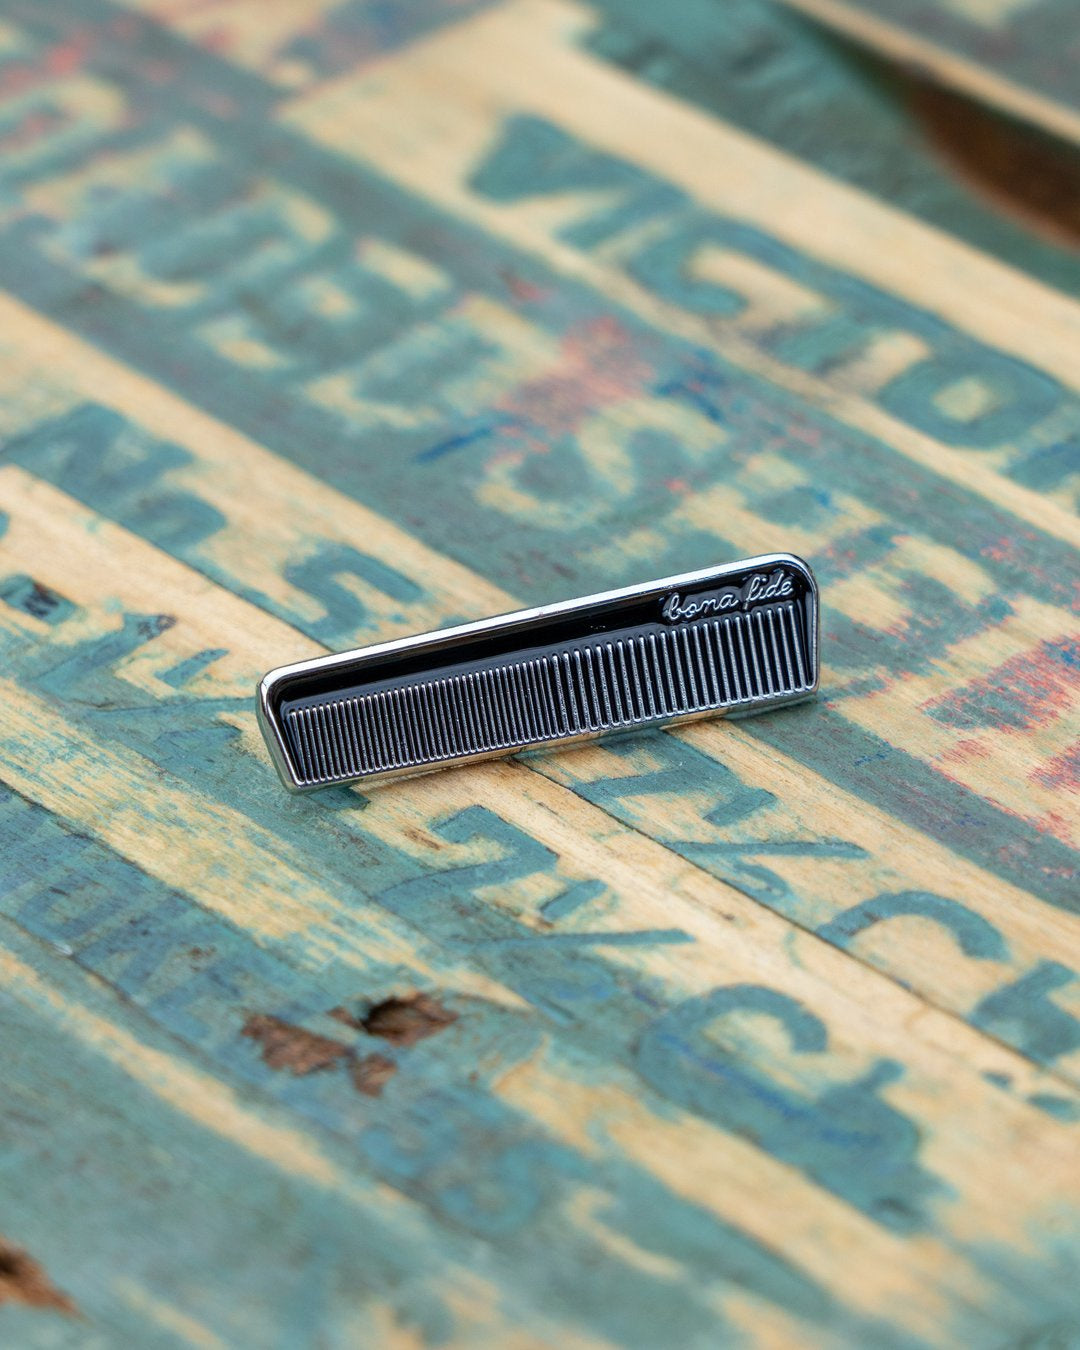 The Comb Pin